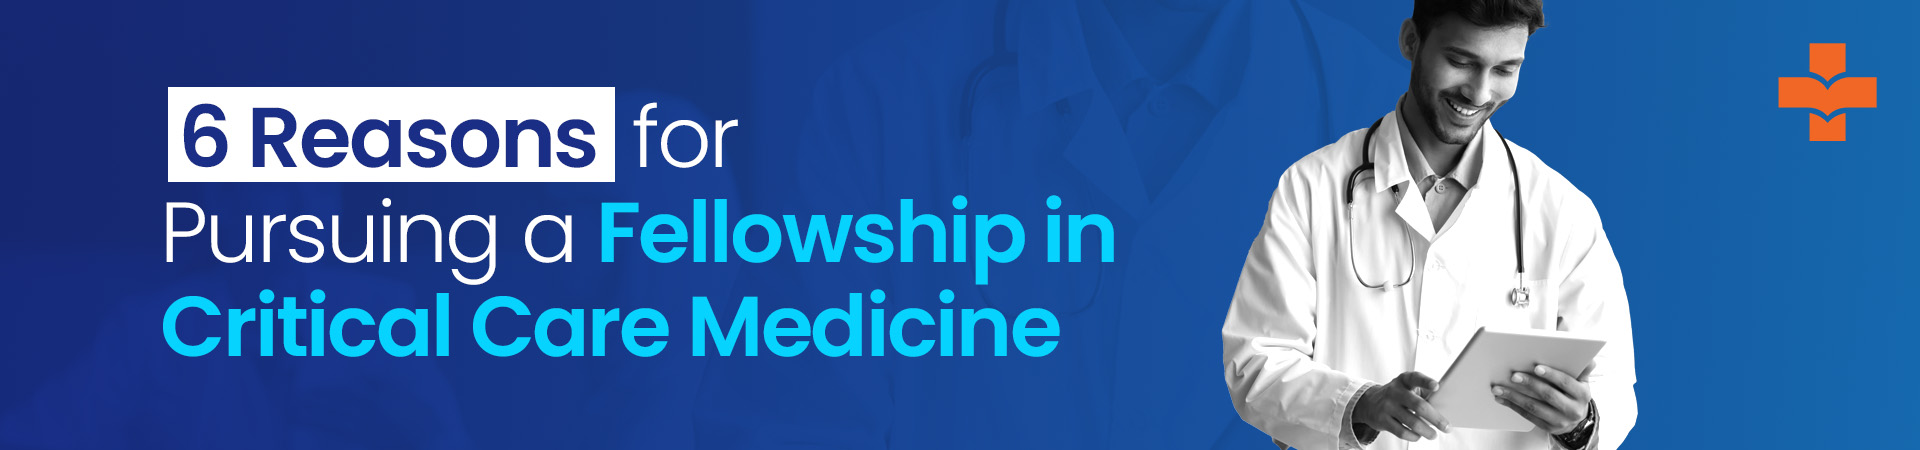 6 reasons to join fellowship in critical care medicine